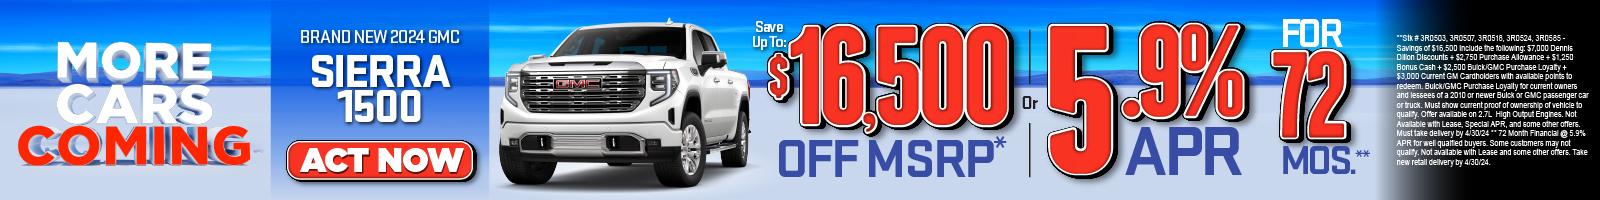 SAM - BRAND NEW 2024 GMC SIERRA 1500 - Save up to $16,500 off MSRP* or 5.9% APR for 72 months**